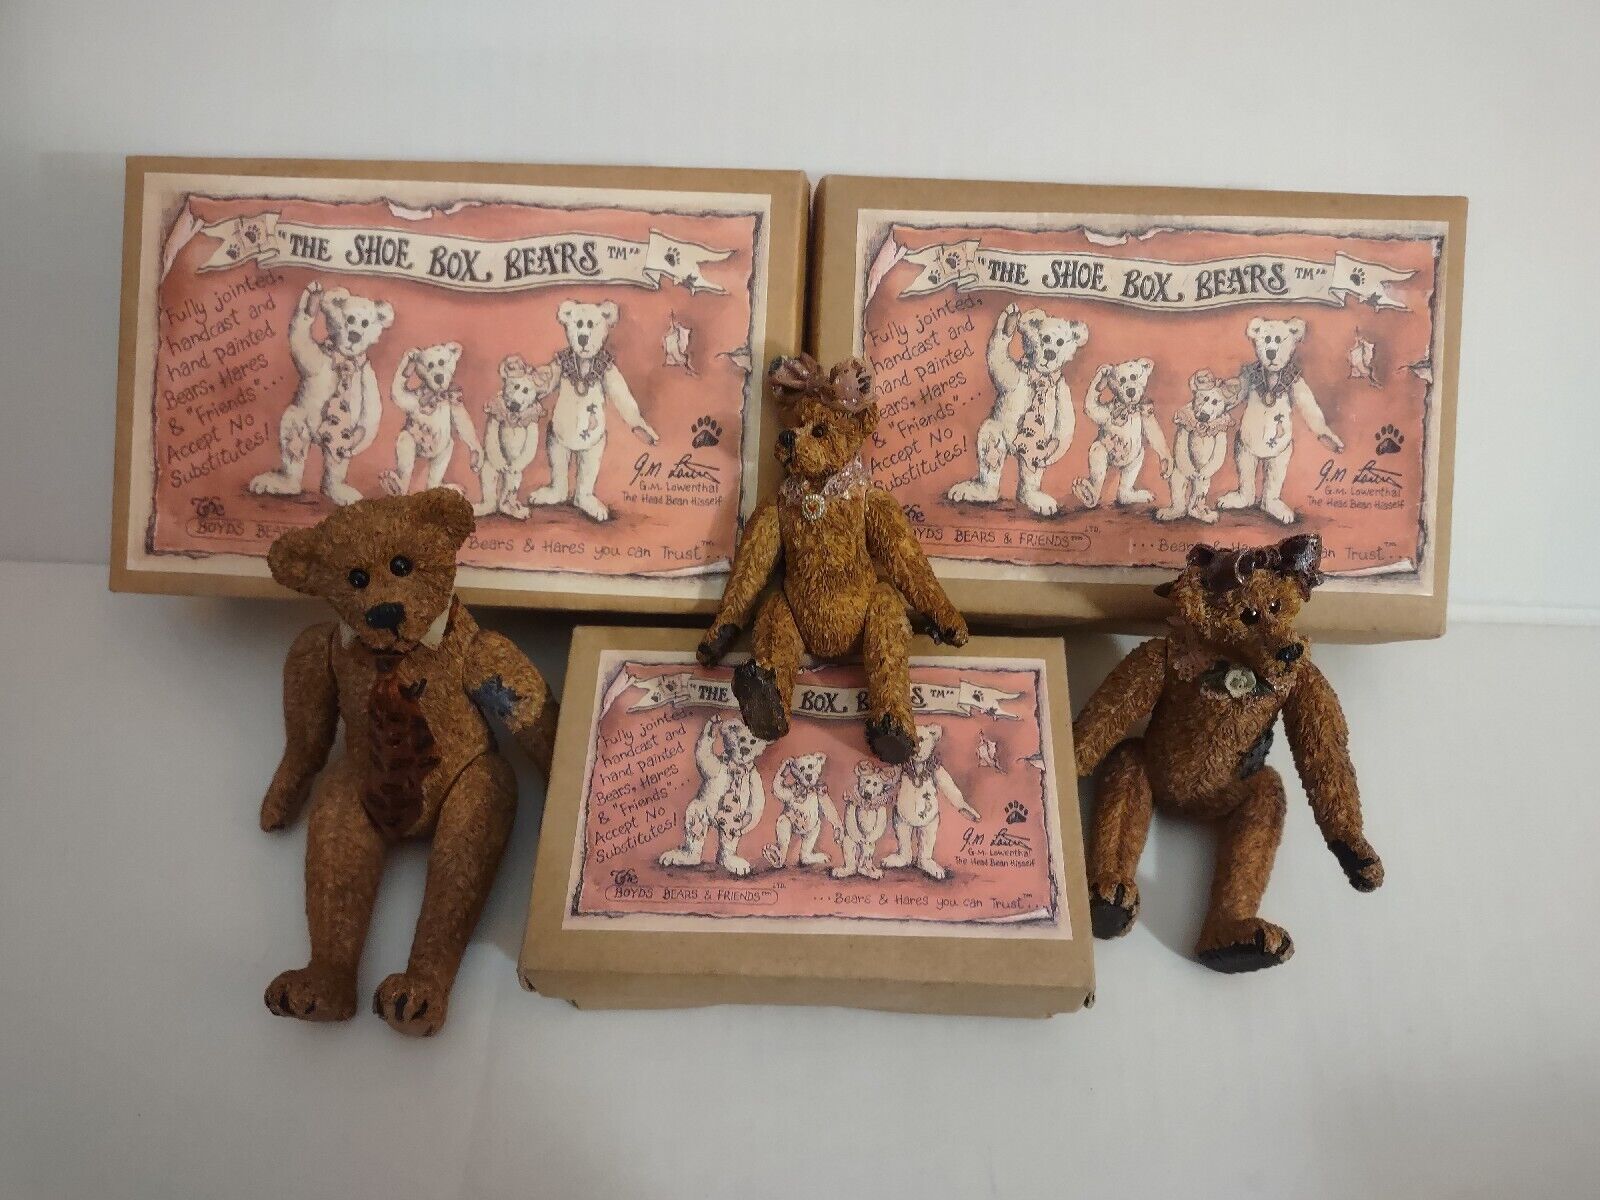 Lot of 3 Boyd’s Bears “Shoe Box Bears Family Collectible